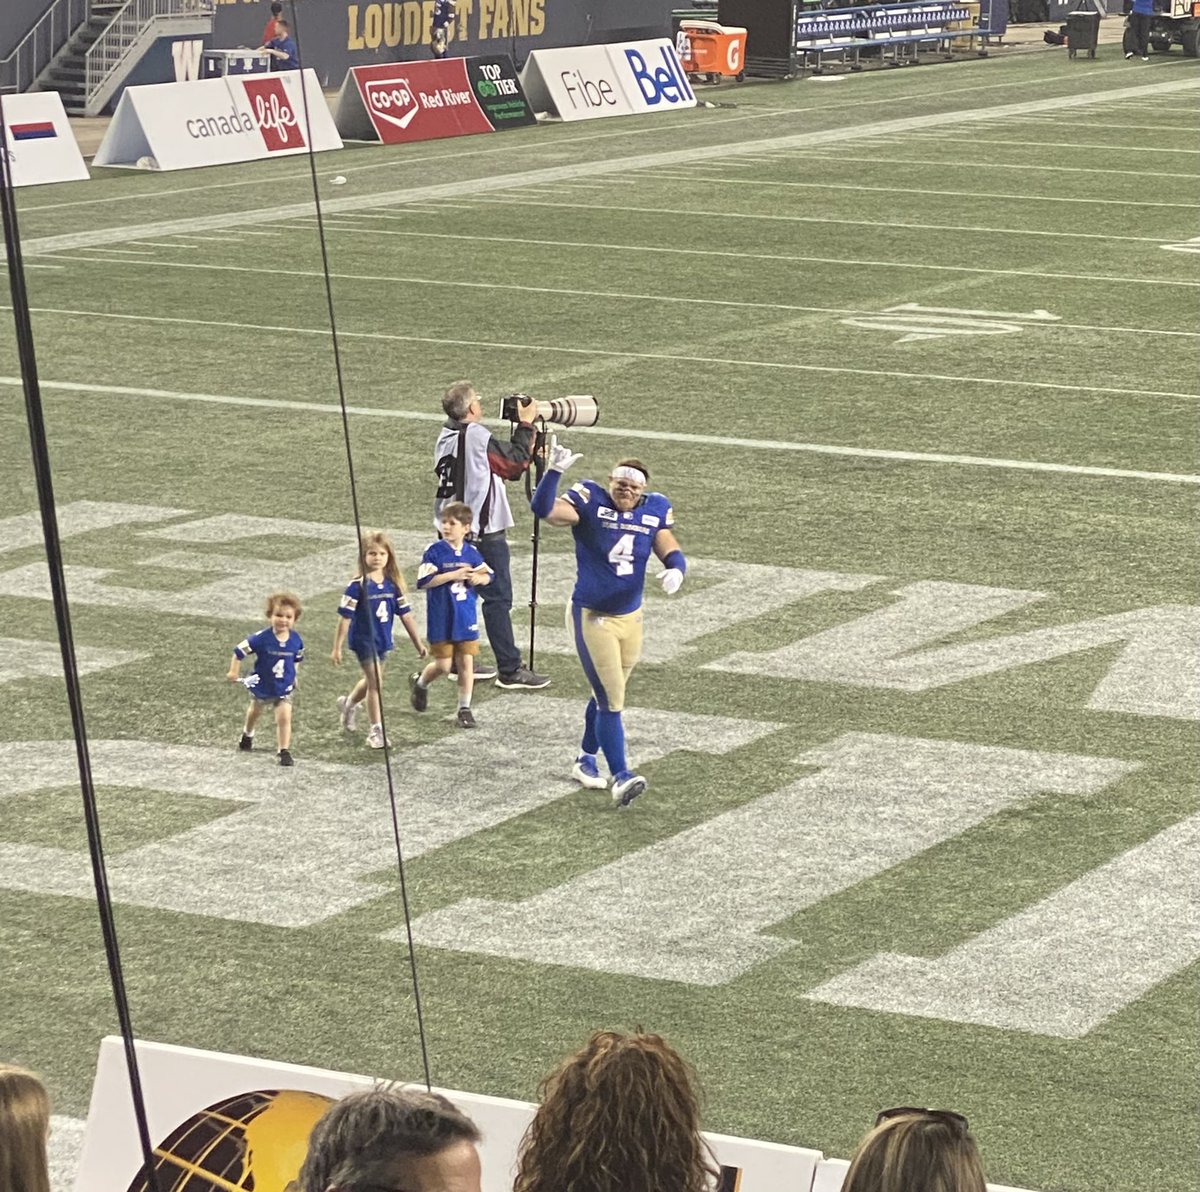 test Twitter Media - Tough game but the boys got er done! #ForTheW https://t.co/qyLjH1jhSY